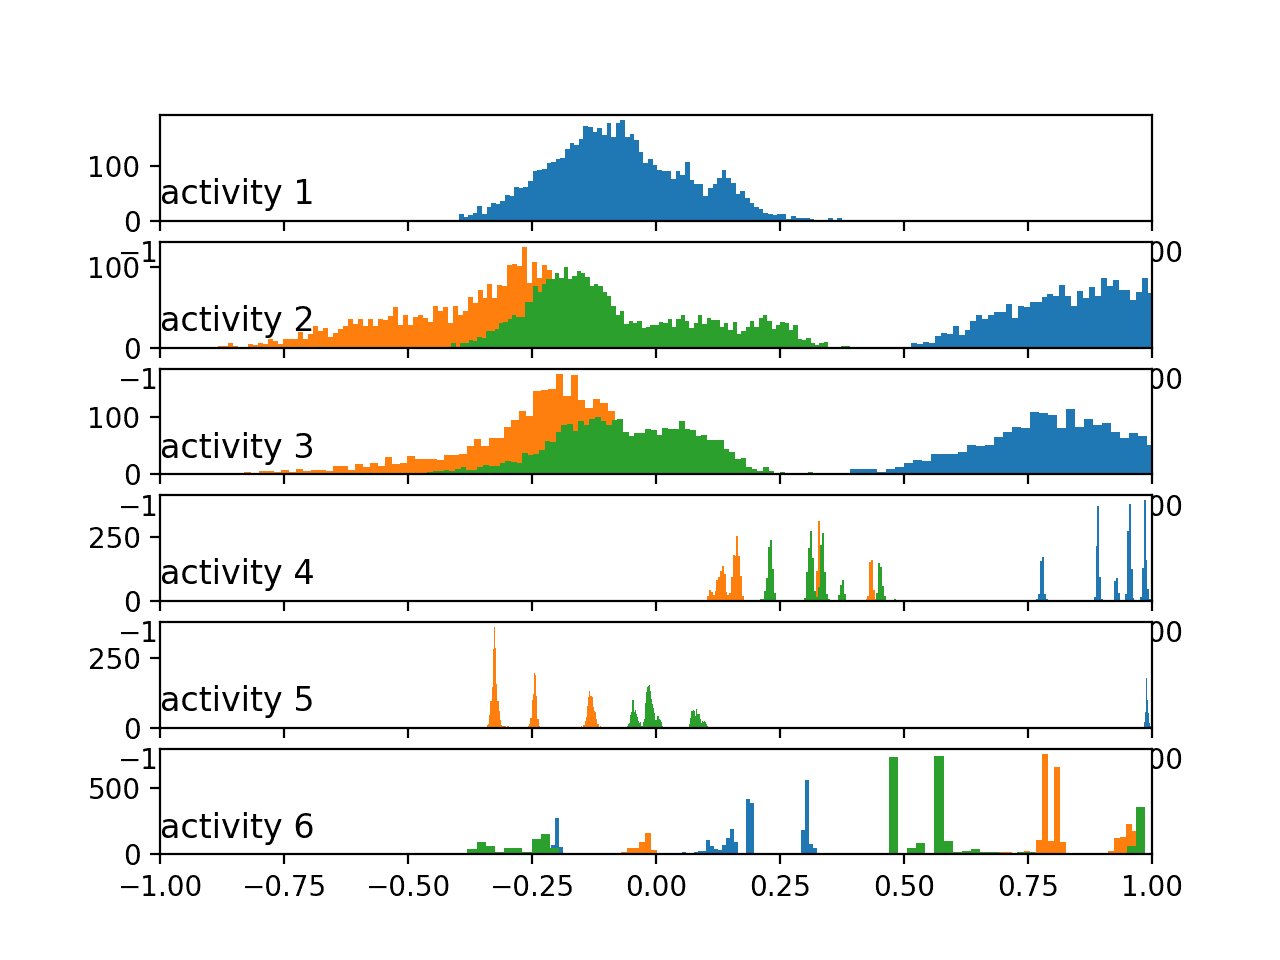 Histograms of the total acceleration data by activity